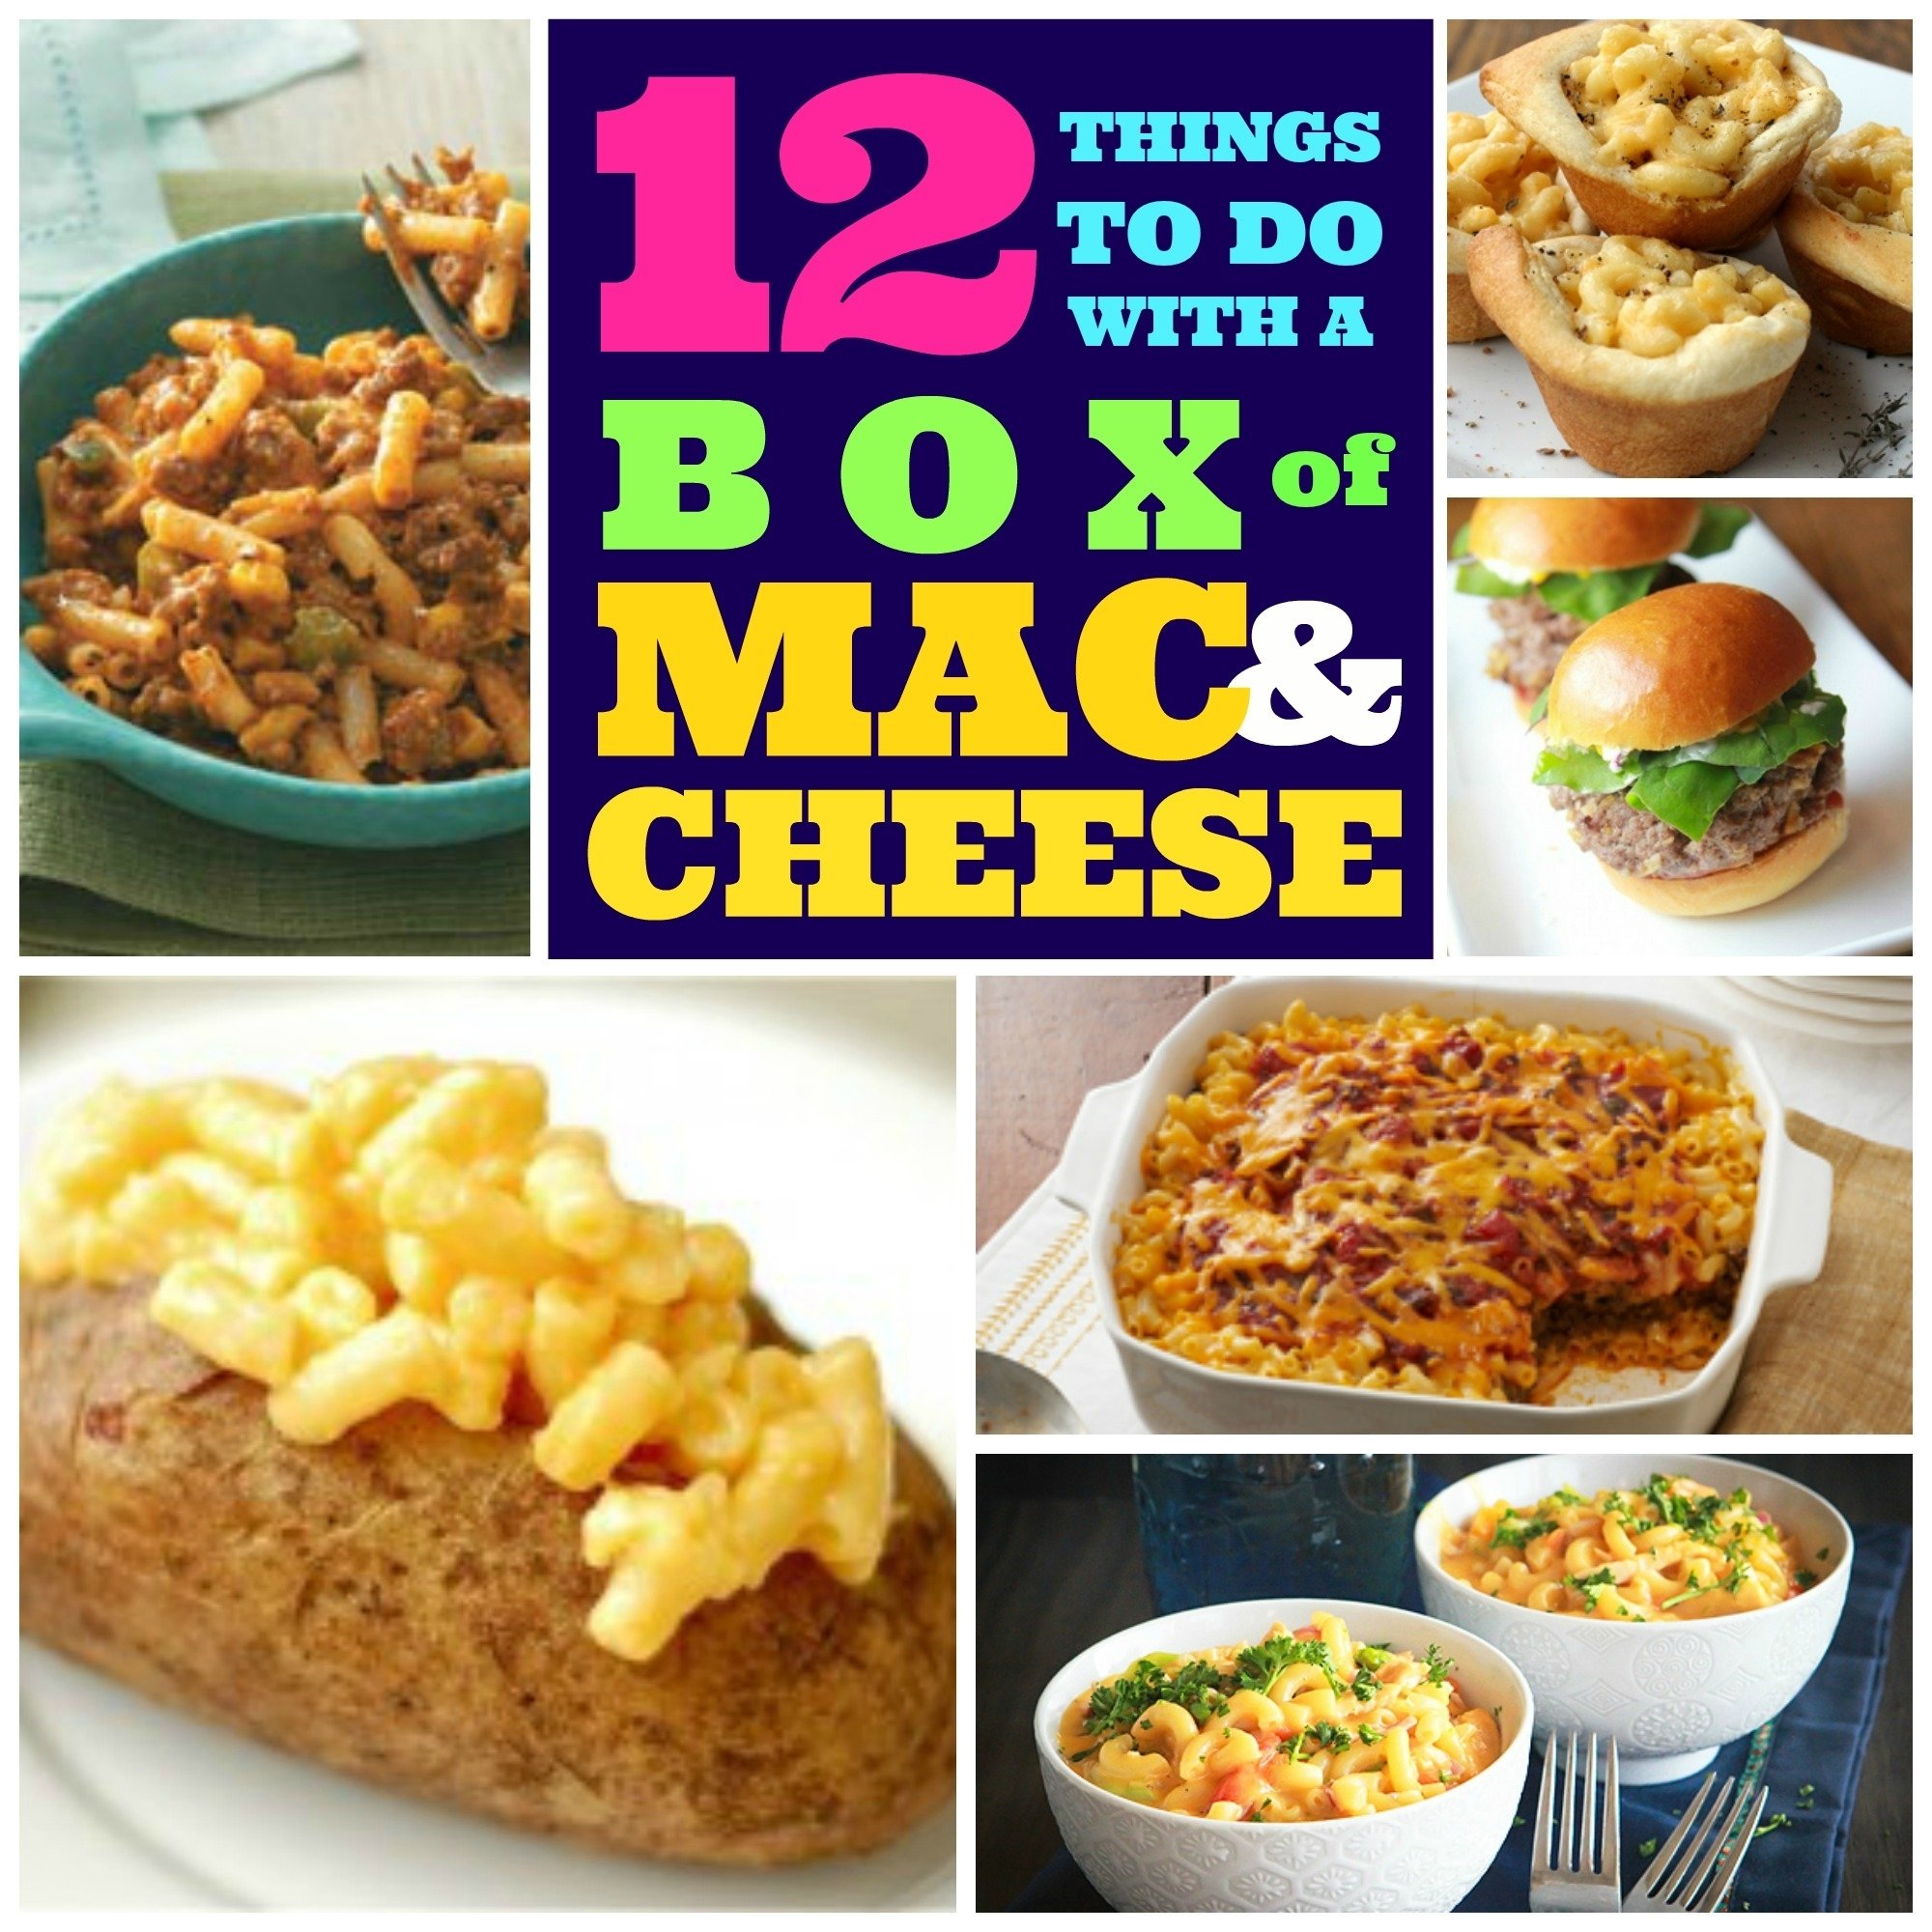 10 Attractive Mac And Cheese Dinner Ideas 12 things to do with a box of mac and cheese babble 2022